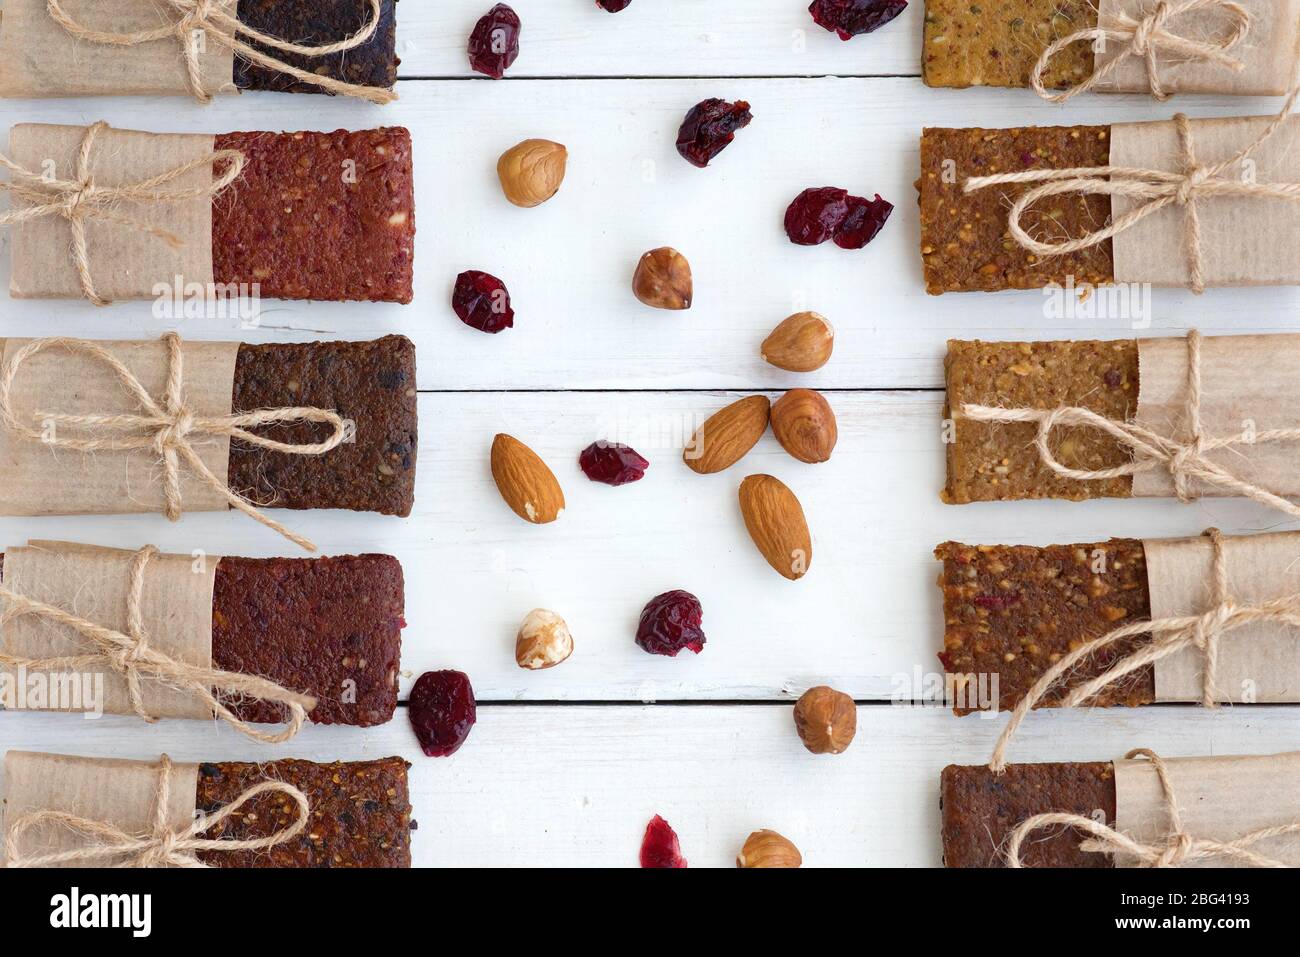 Rows of Home made healthy protein bars on a table Stock Photo